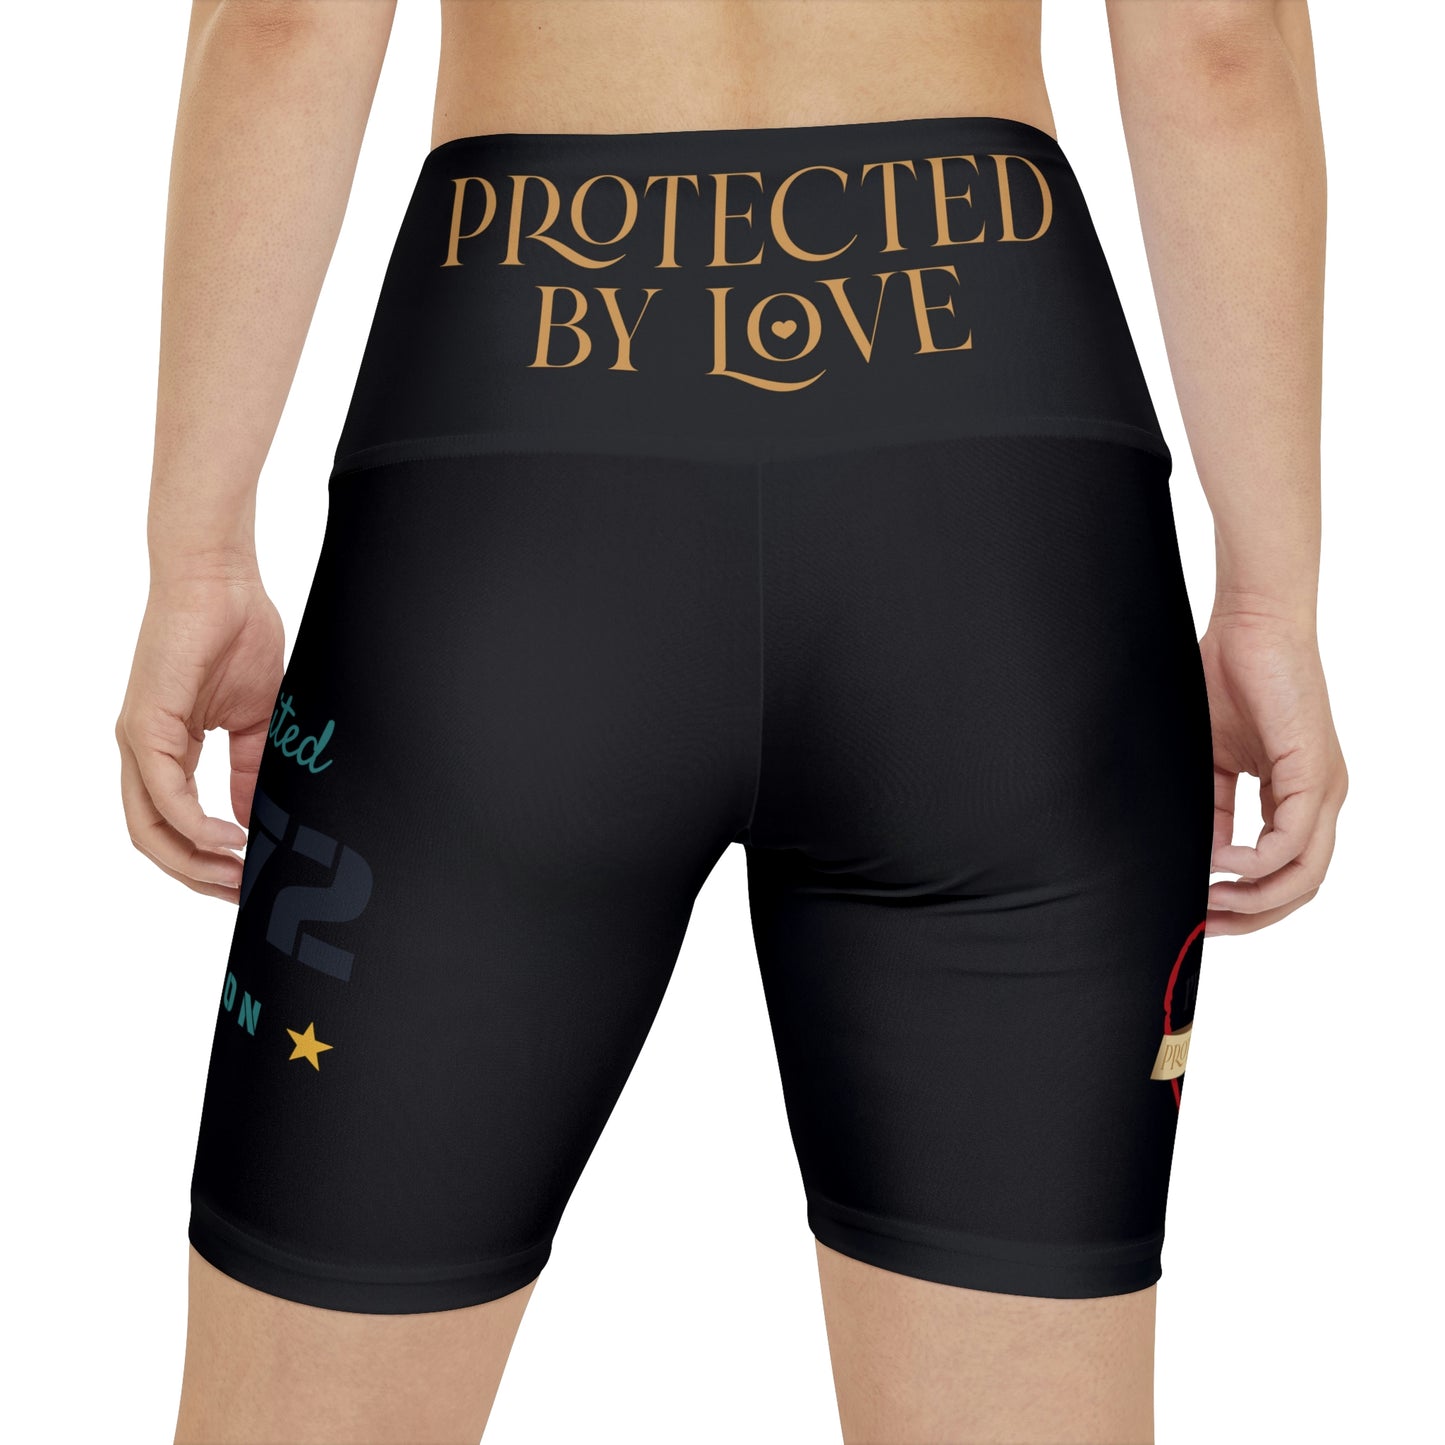 Protected by Love Women's Workout Shorts